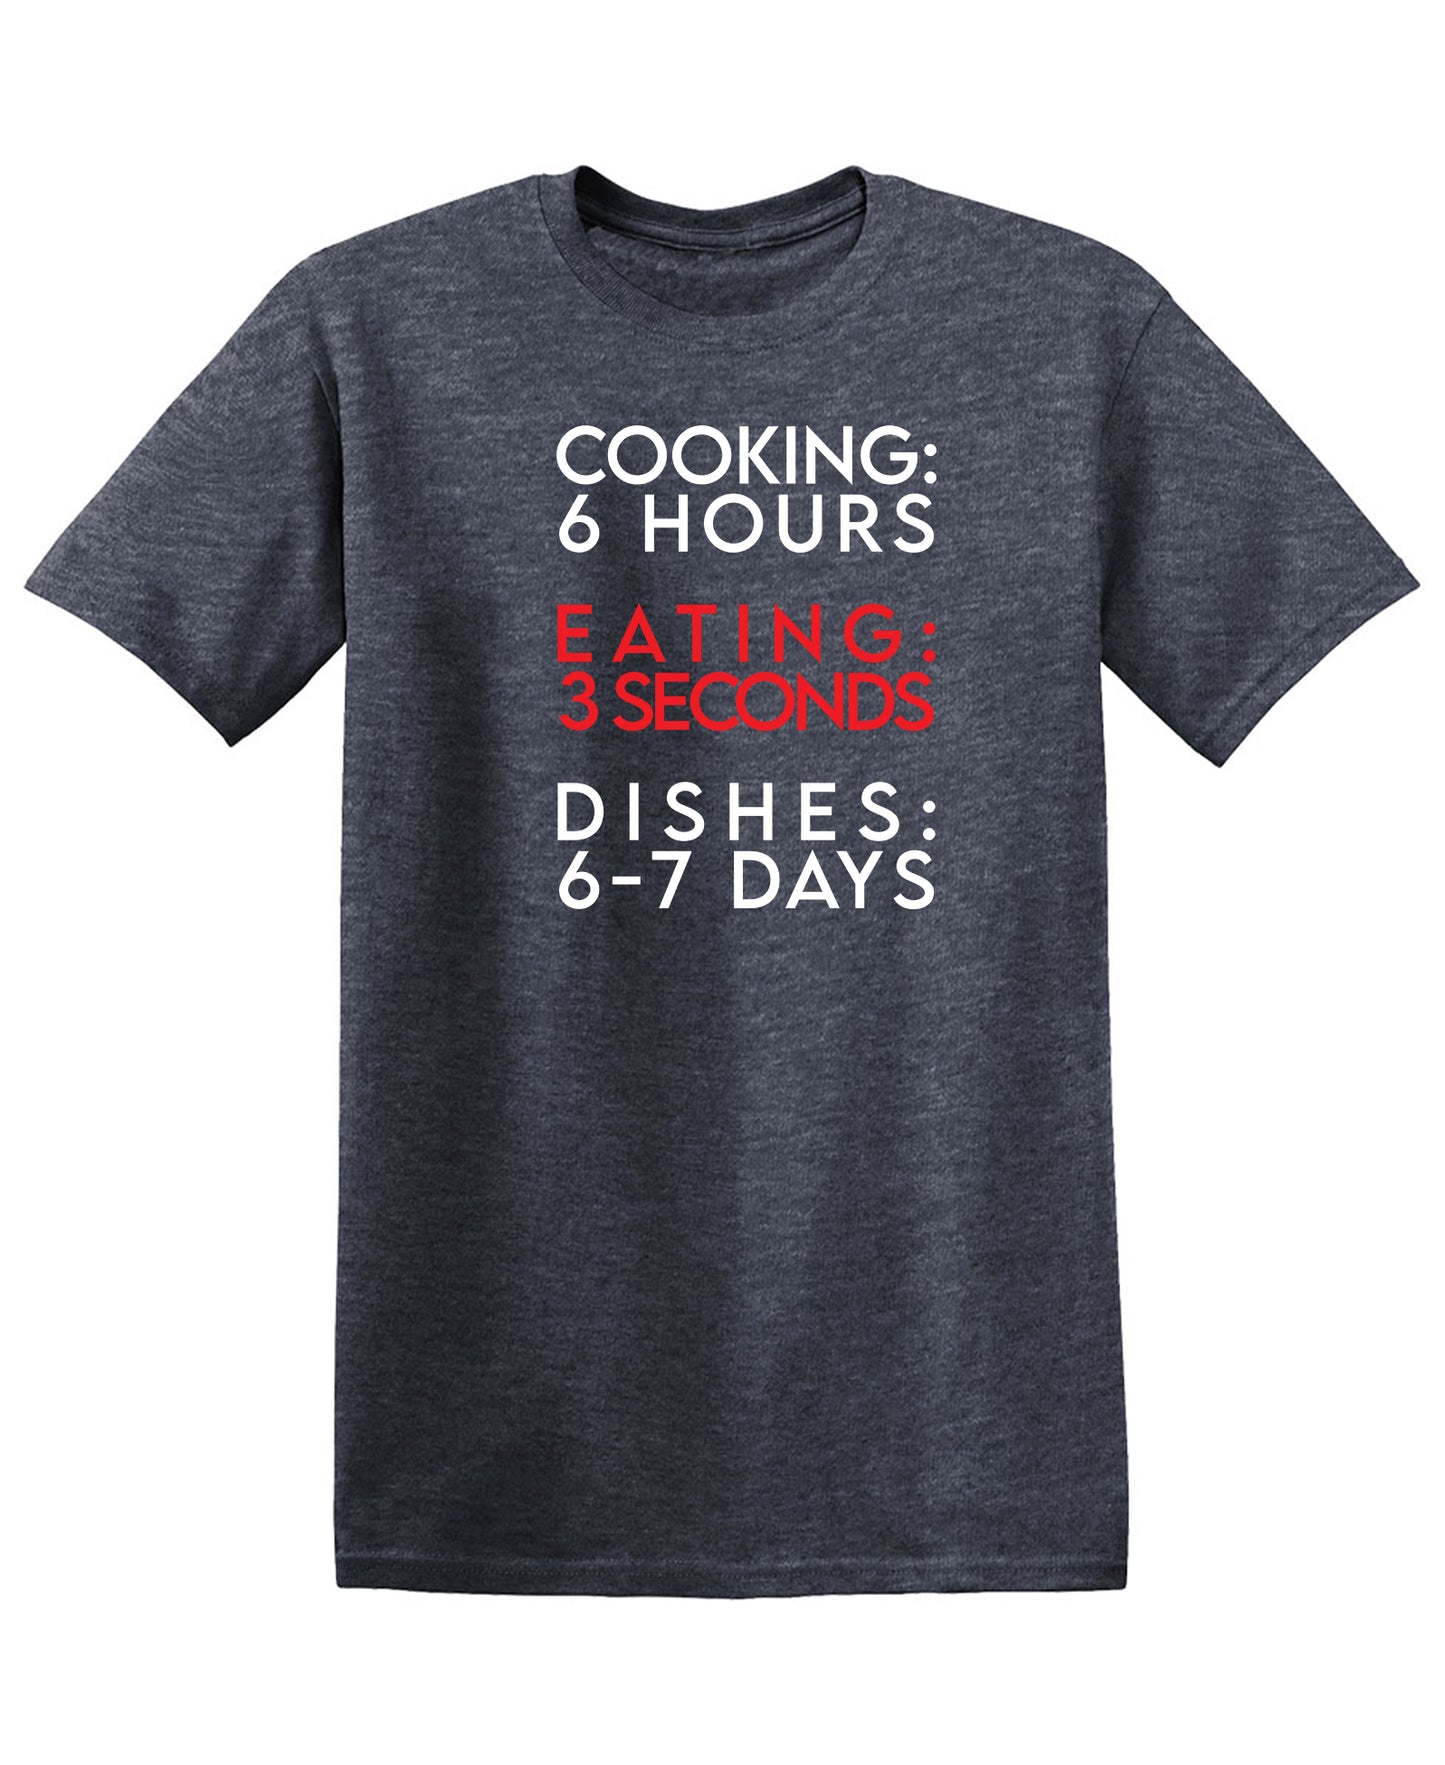 Cooking 6 Hours, Eating 3 Seconds, Dishers 6-7 Days Funny Tee